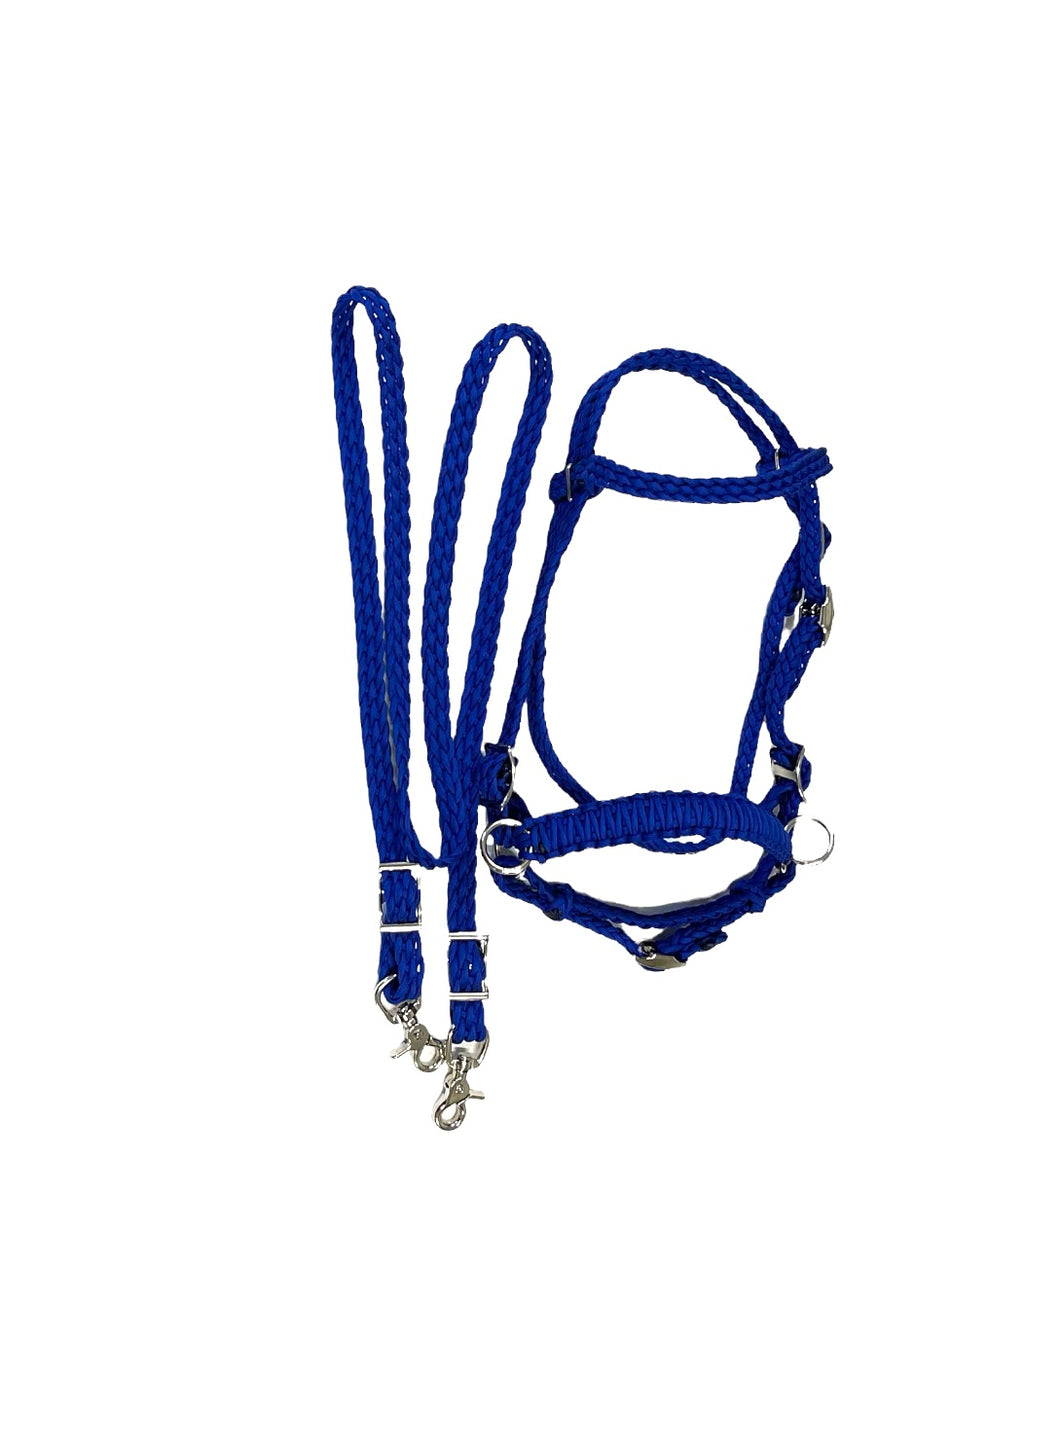 complete bitless bridle side pull hackamore electric blue with reins ....pony, Cob, Horse. or Draft horse size